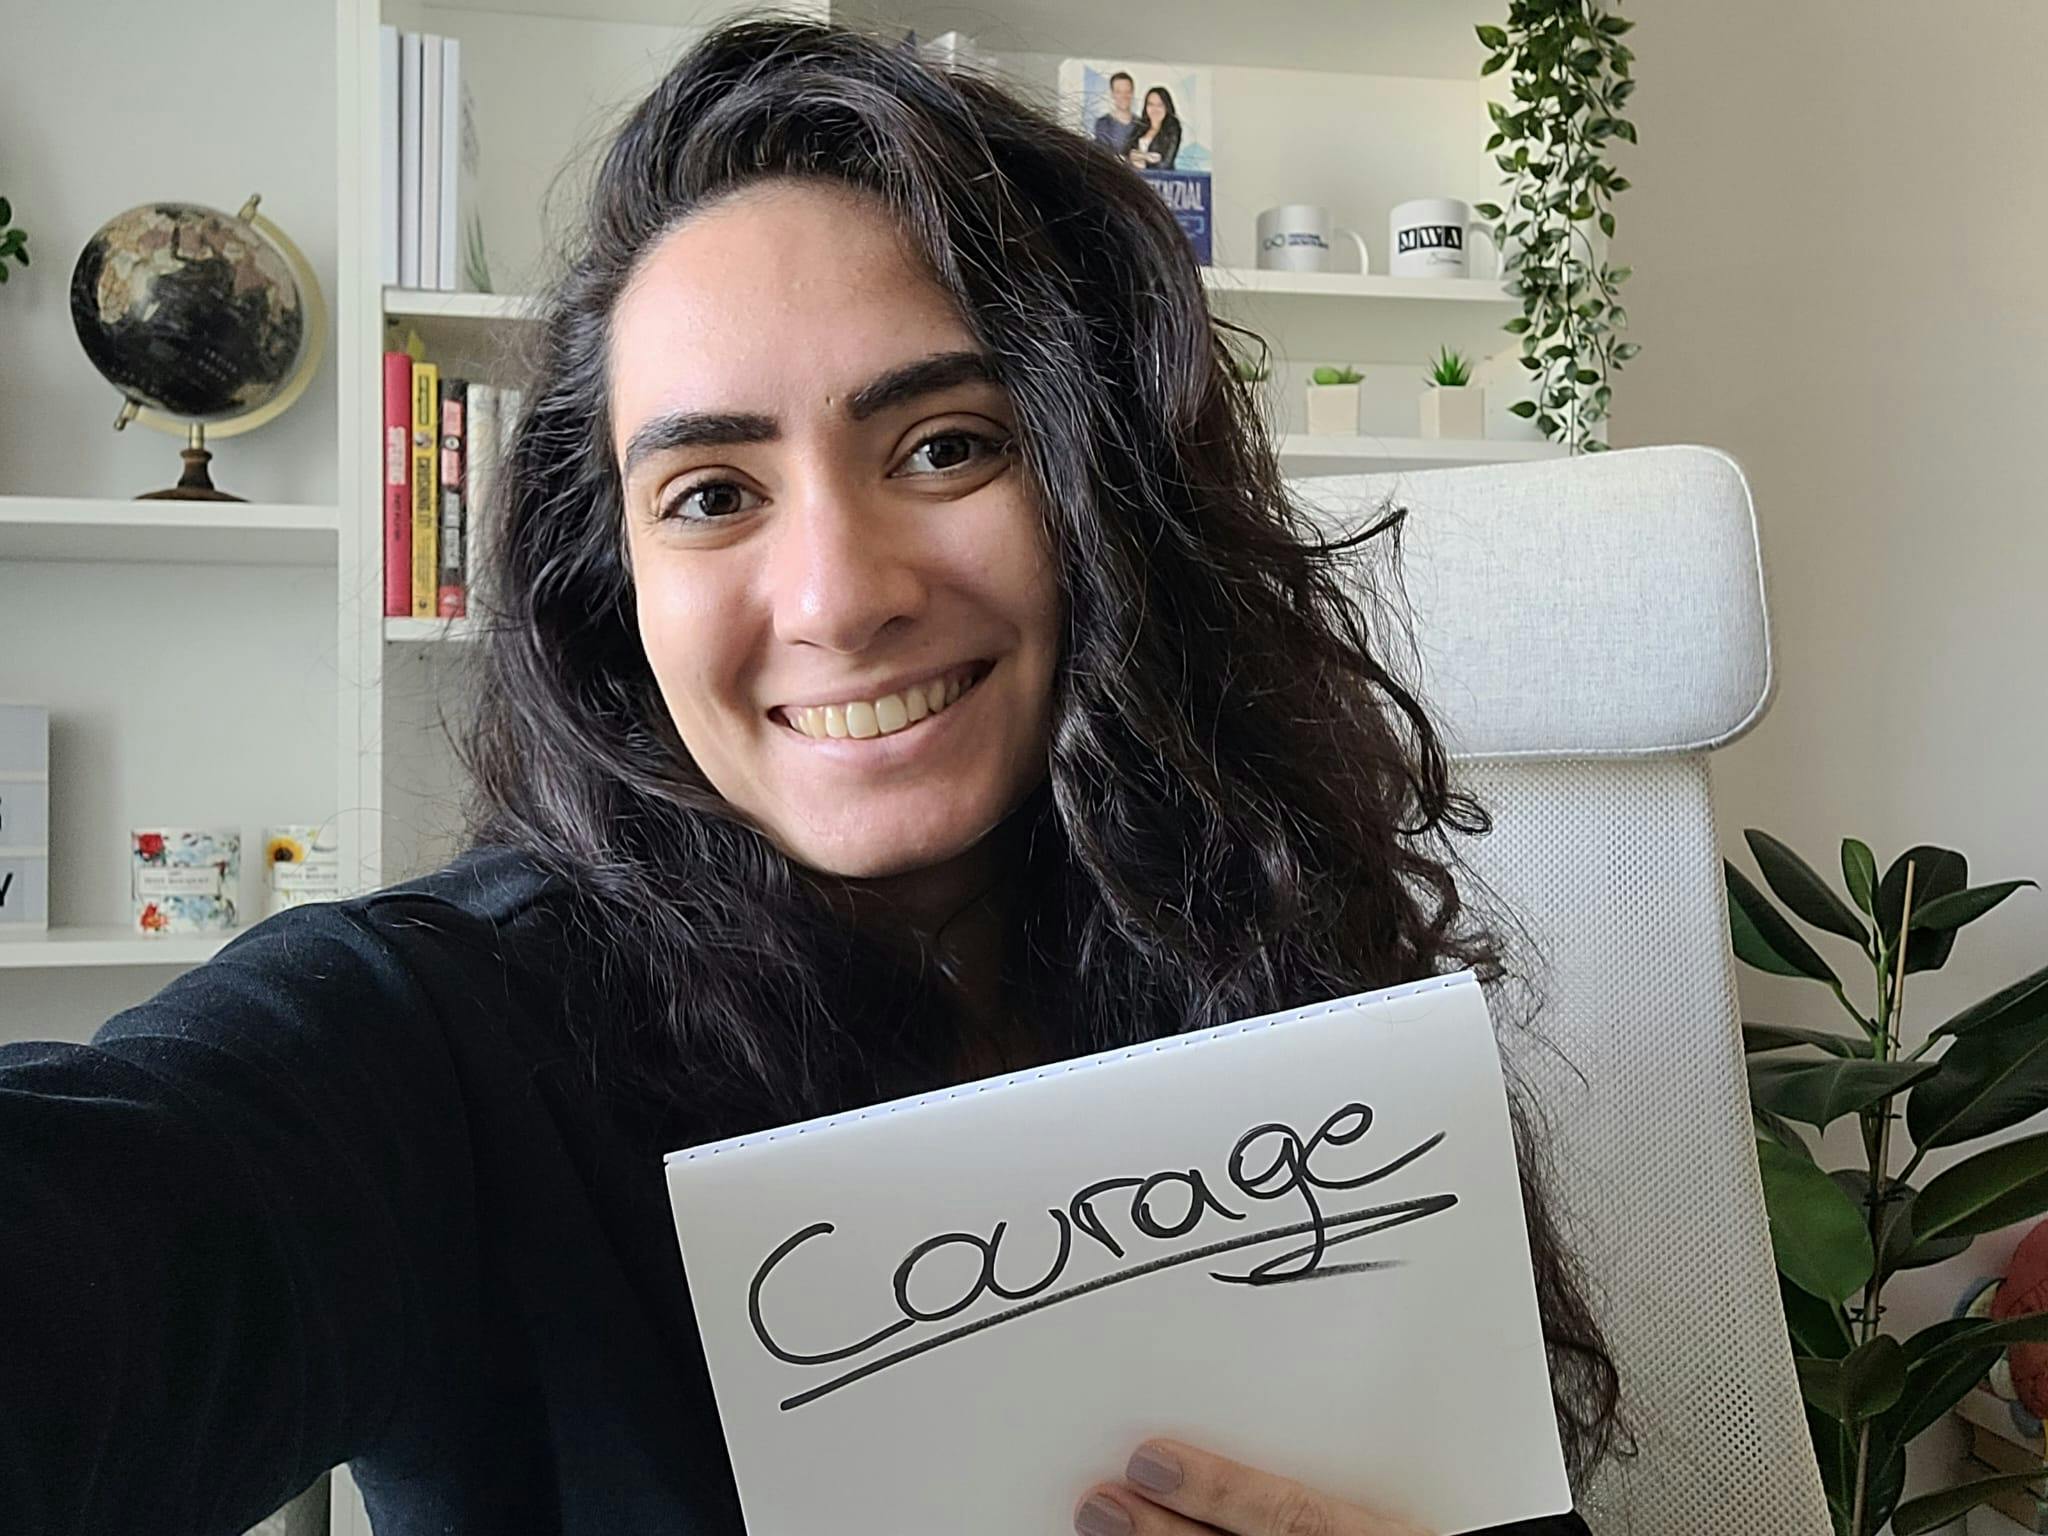 Sinem holding a sign that says "Courage"